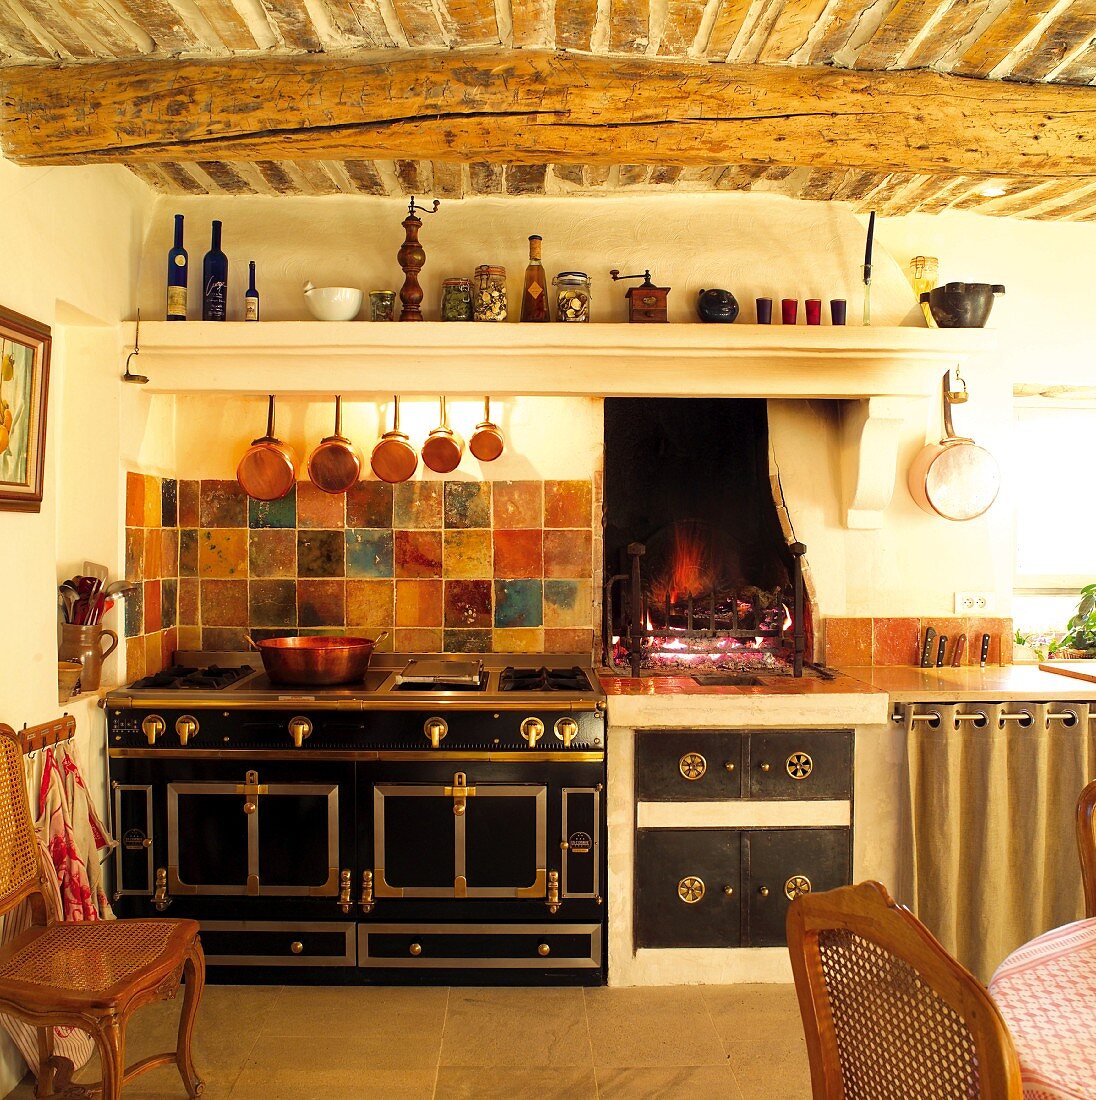 Mediterranean kitchen with brick ceiling and round beams above stylish retro cooker and open fireplace